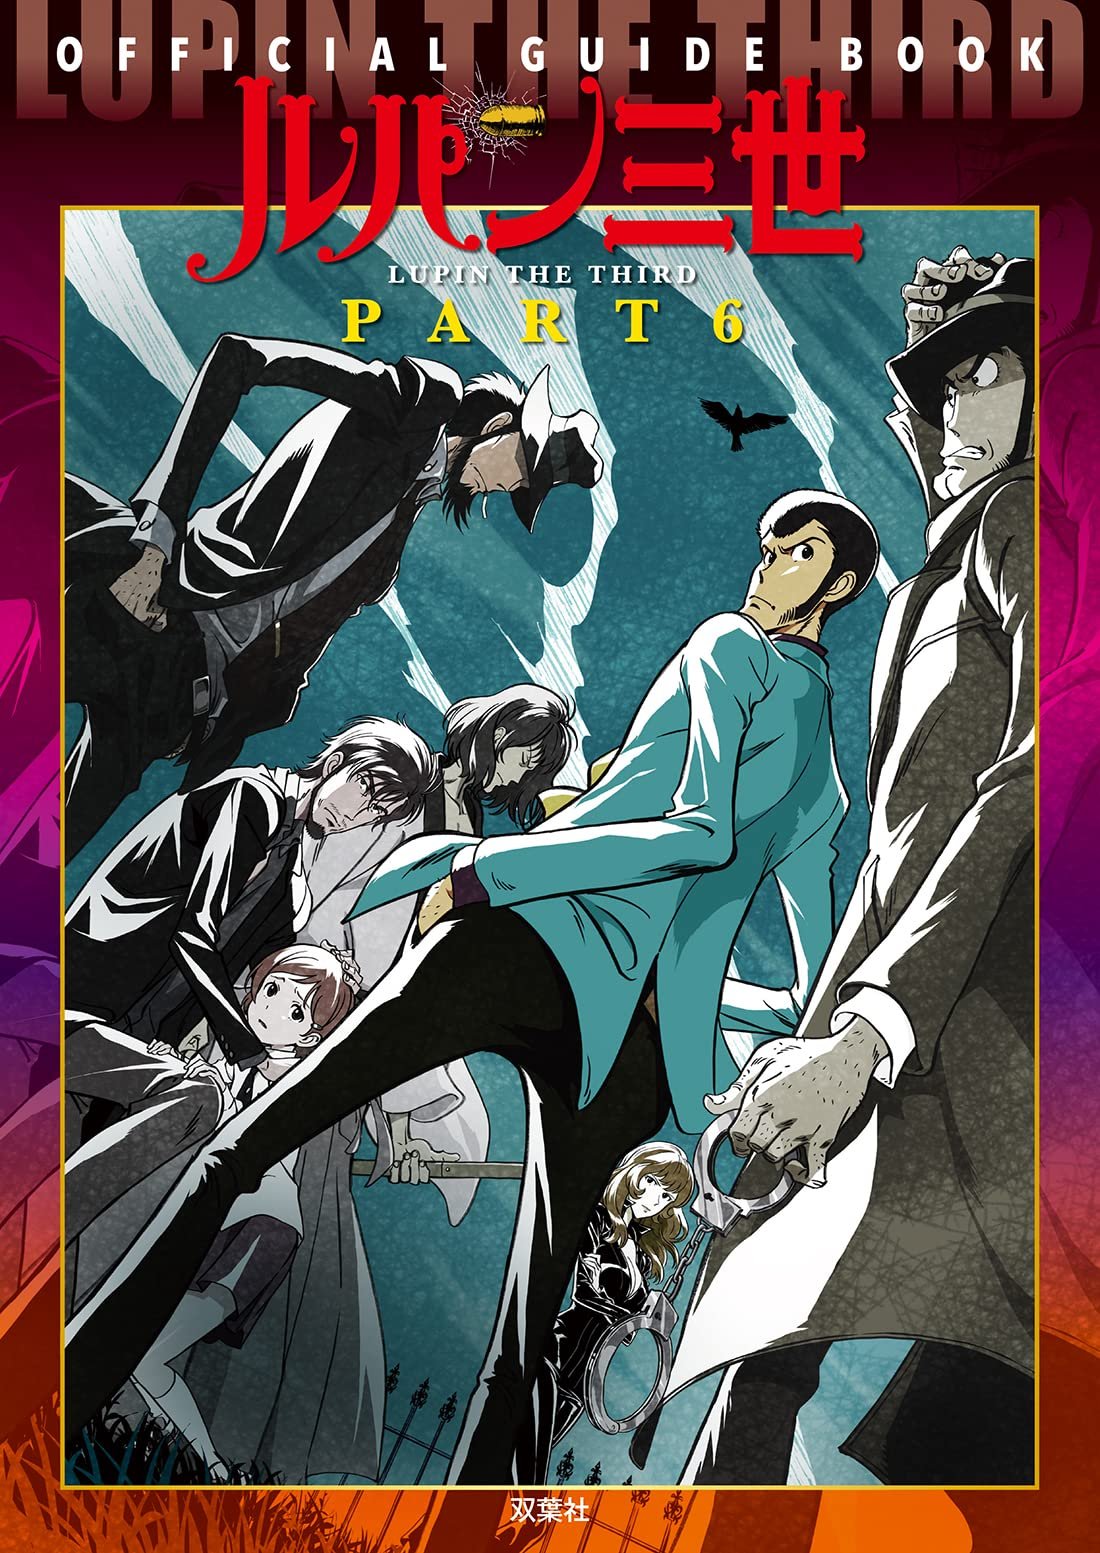 Psycho Pass Official Profiling 2 Japanese Artbook Japan Guide Book US Seller 